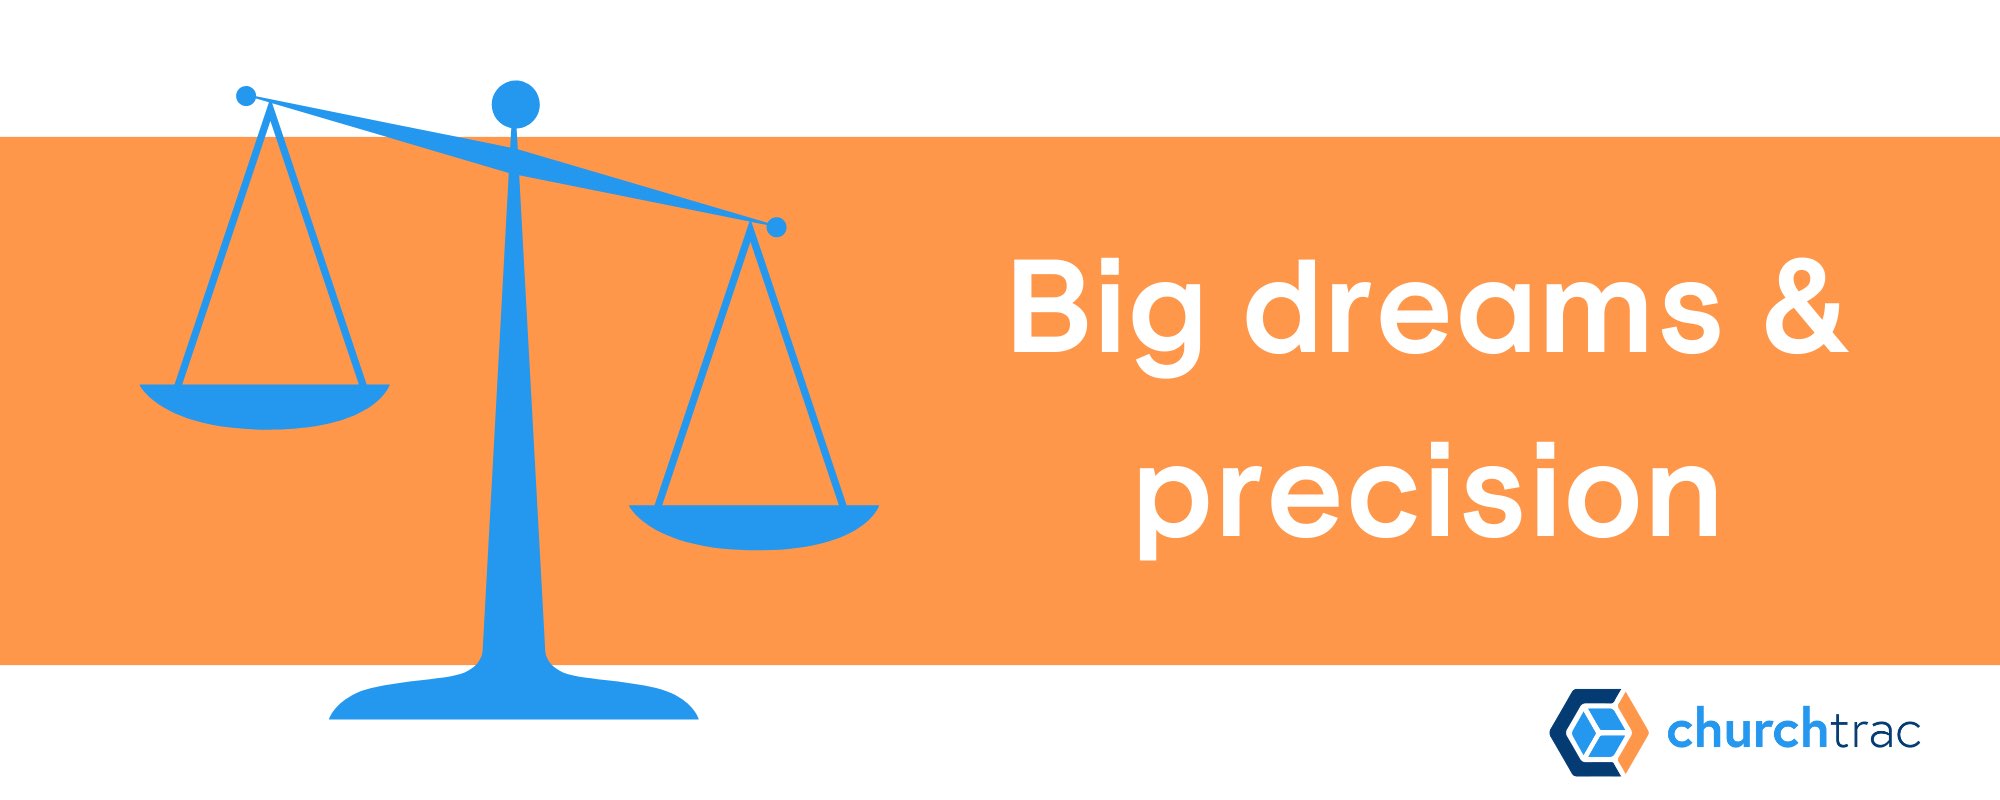 Balance big dreams with precise language in your church vision statement